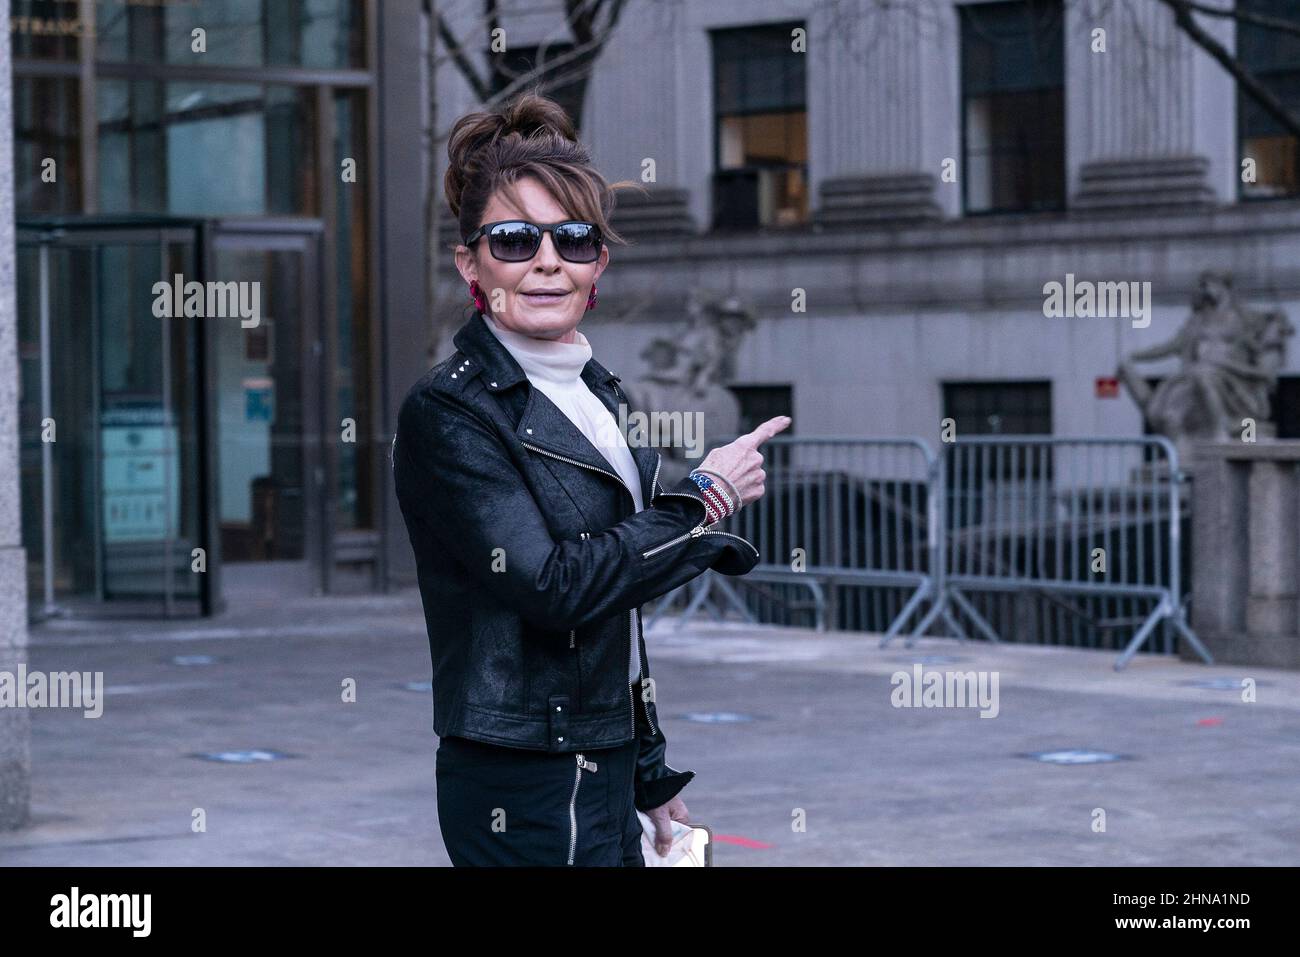 New York, United States. 14th Feb, 2022. Sarah Palin, former Governor of Alaska leaves court after judge Jed Rakoff dismissed her libel case against The New York Times at U.S. Southern District Court. She briefly addressed the media in front of the court. The jury is still deliberating as the judge made his decision apparently did not know about it. The judge said Palin had failed to show that The New York Times had acted out of malice. (Photo by Lev Radin/Pacific Press) Credit: Pacific Press Media Production Corp./Alamy Live News Stock Photo